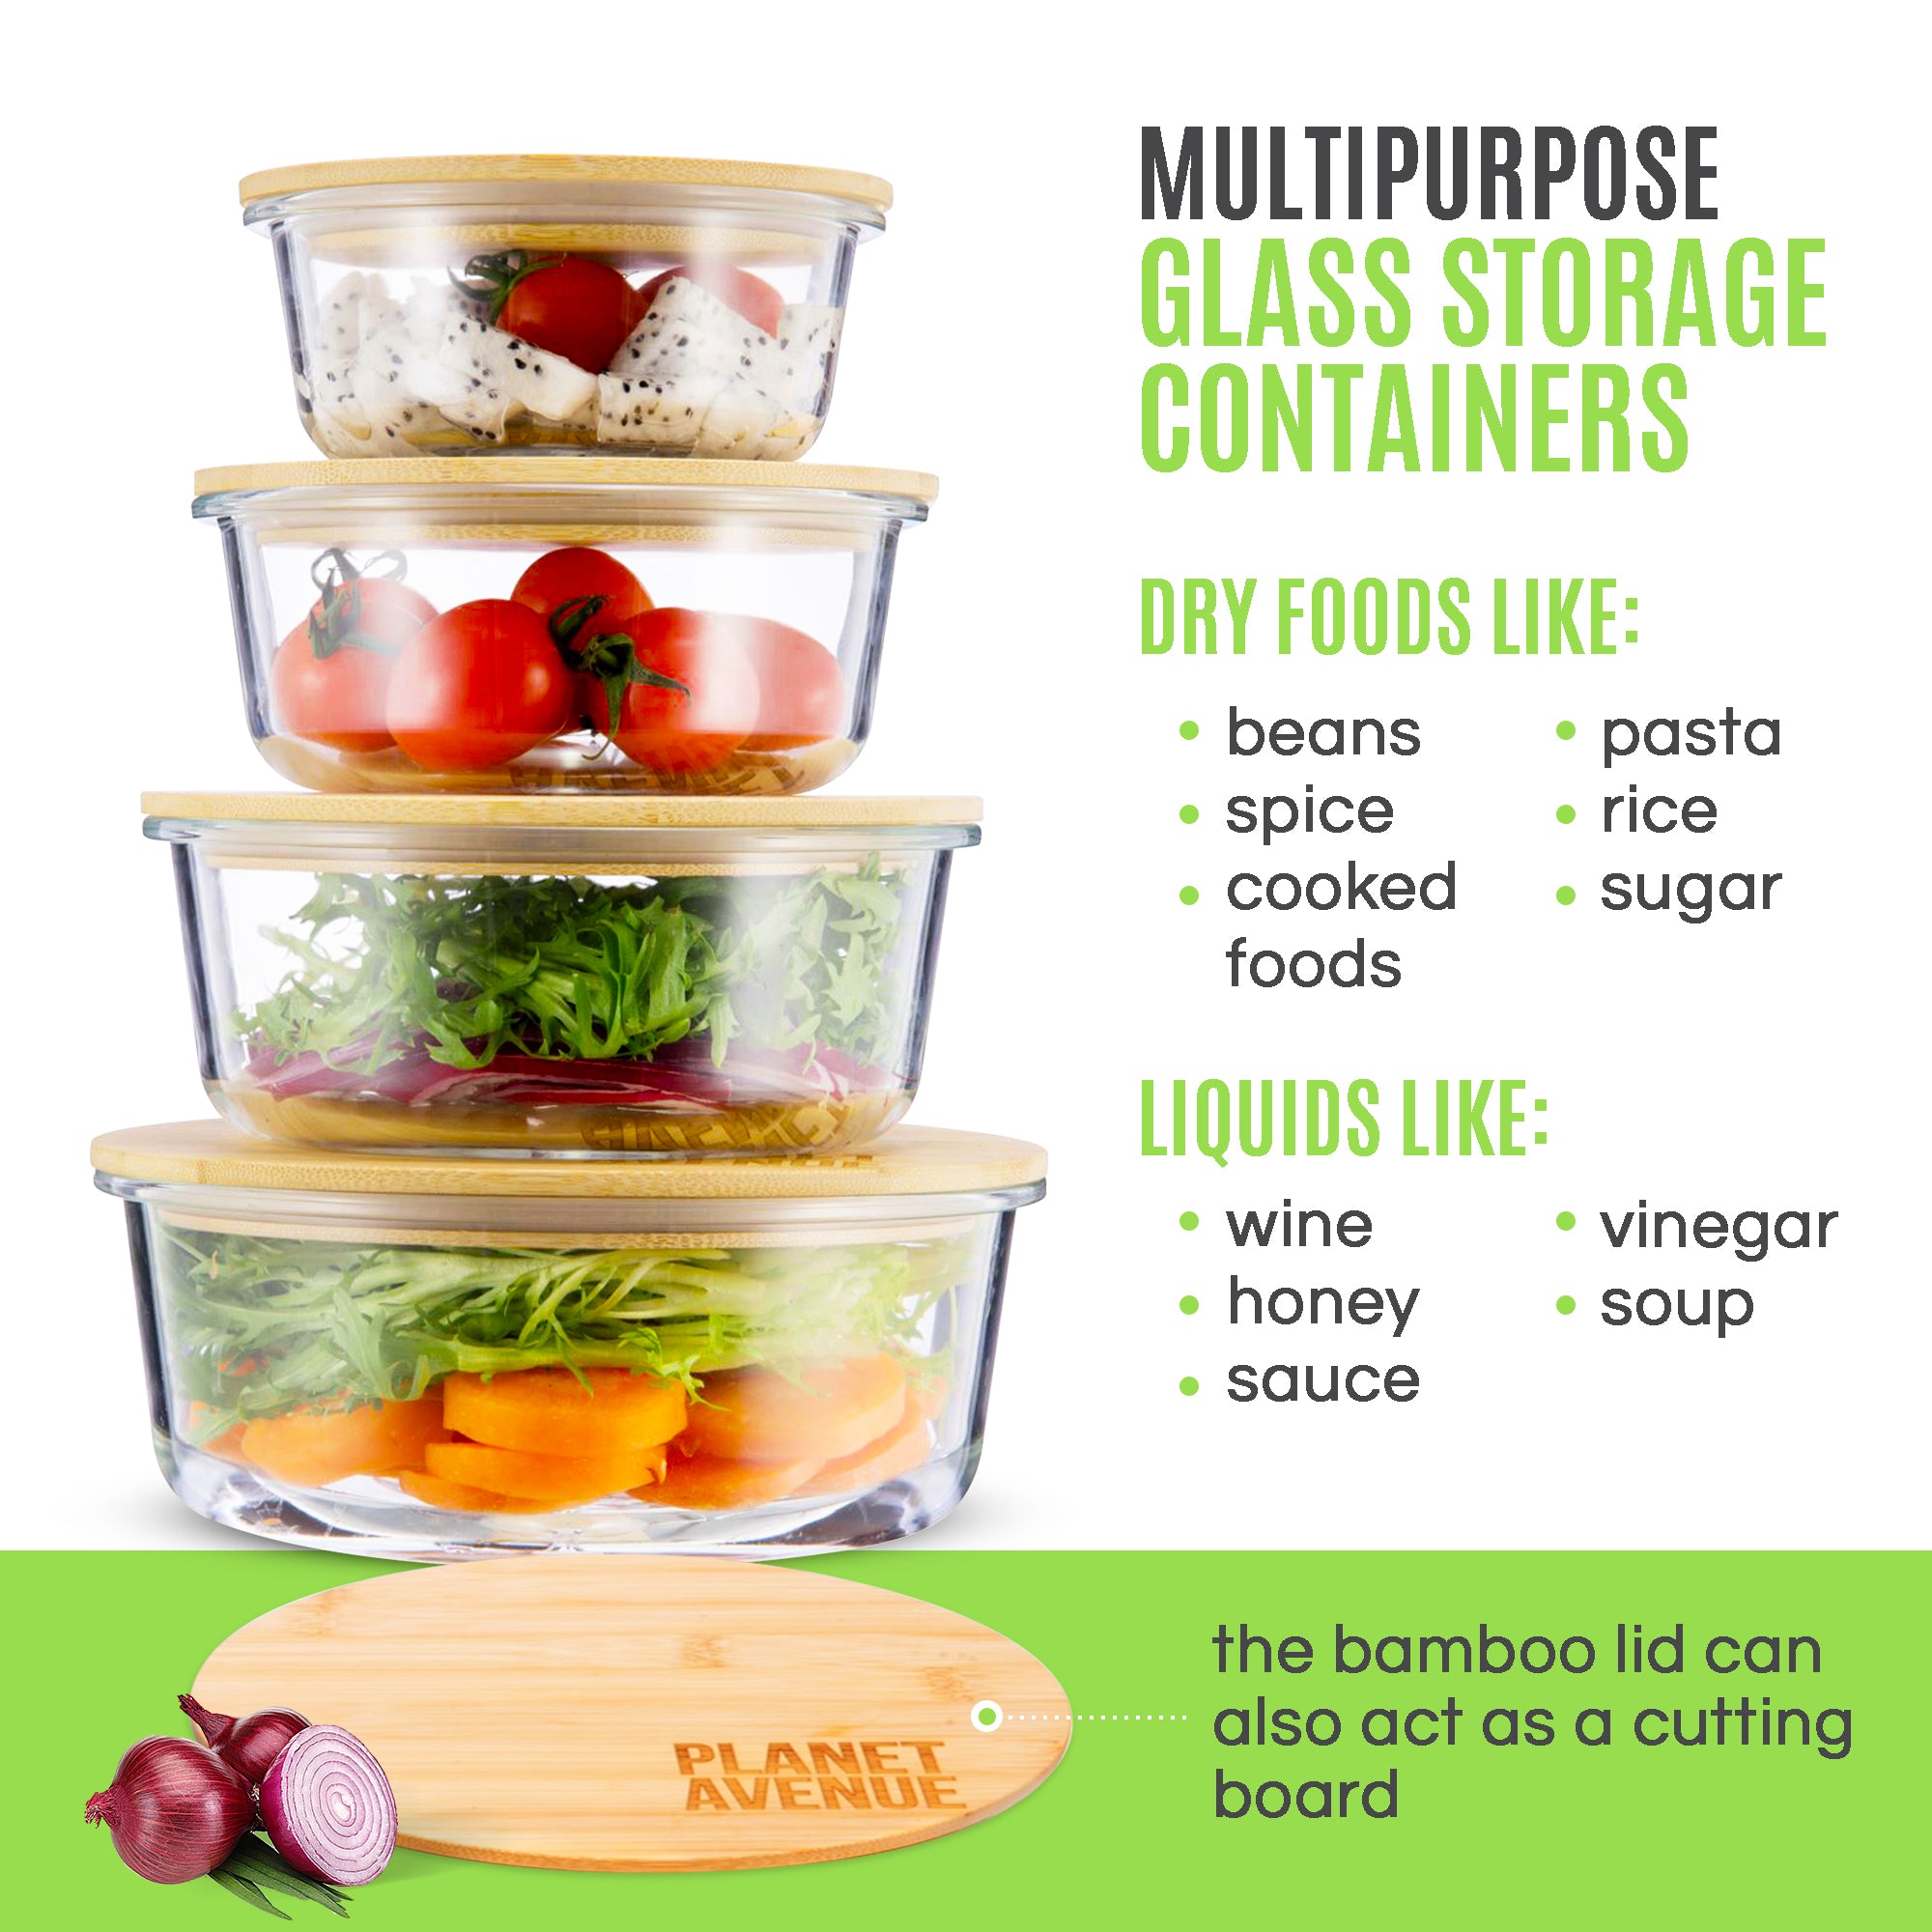 Glass Food Storage Containers with Lids (Bamboo) Set of 5. Bonus 6 Silicone  Stretch Lids. BPA Free, Plastic Free & Eco Friendly Food Storage. Glass Meal  Prep Containers for Lunch and Leftovers.